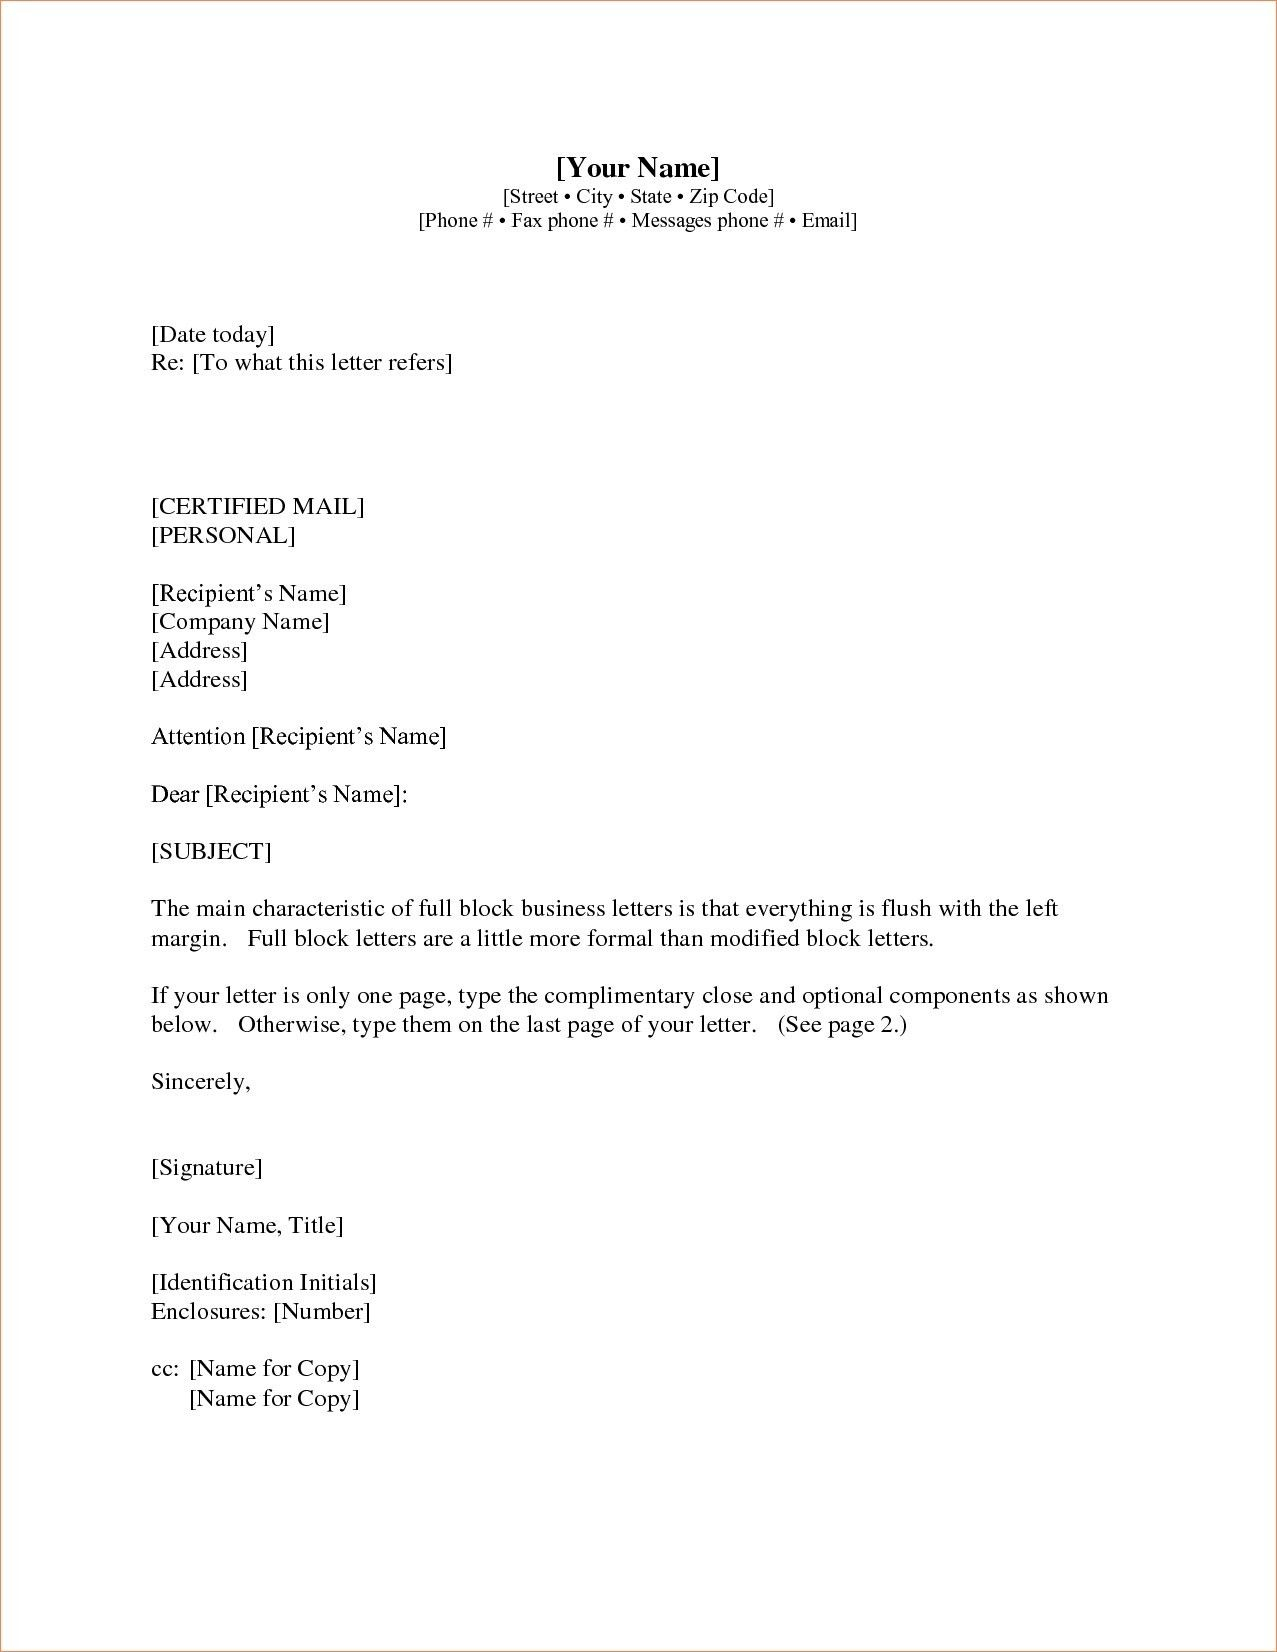 New Format For Business Letter With Enclosure And Cc 